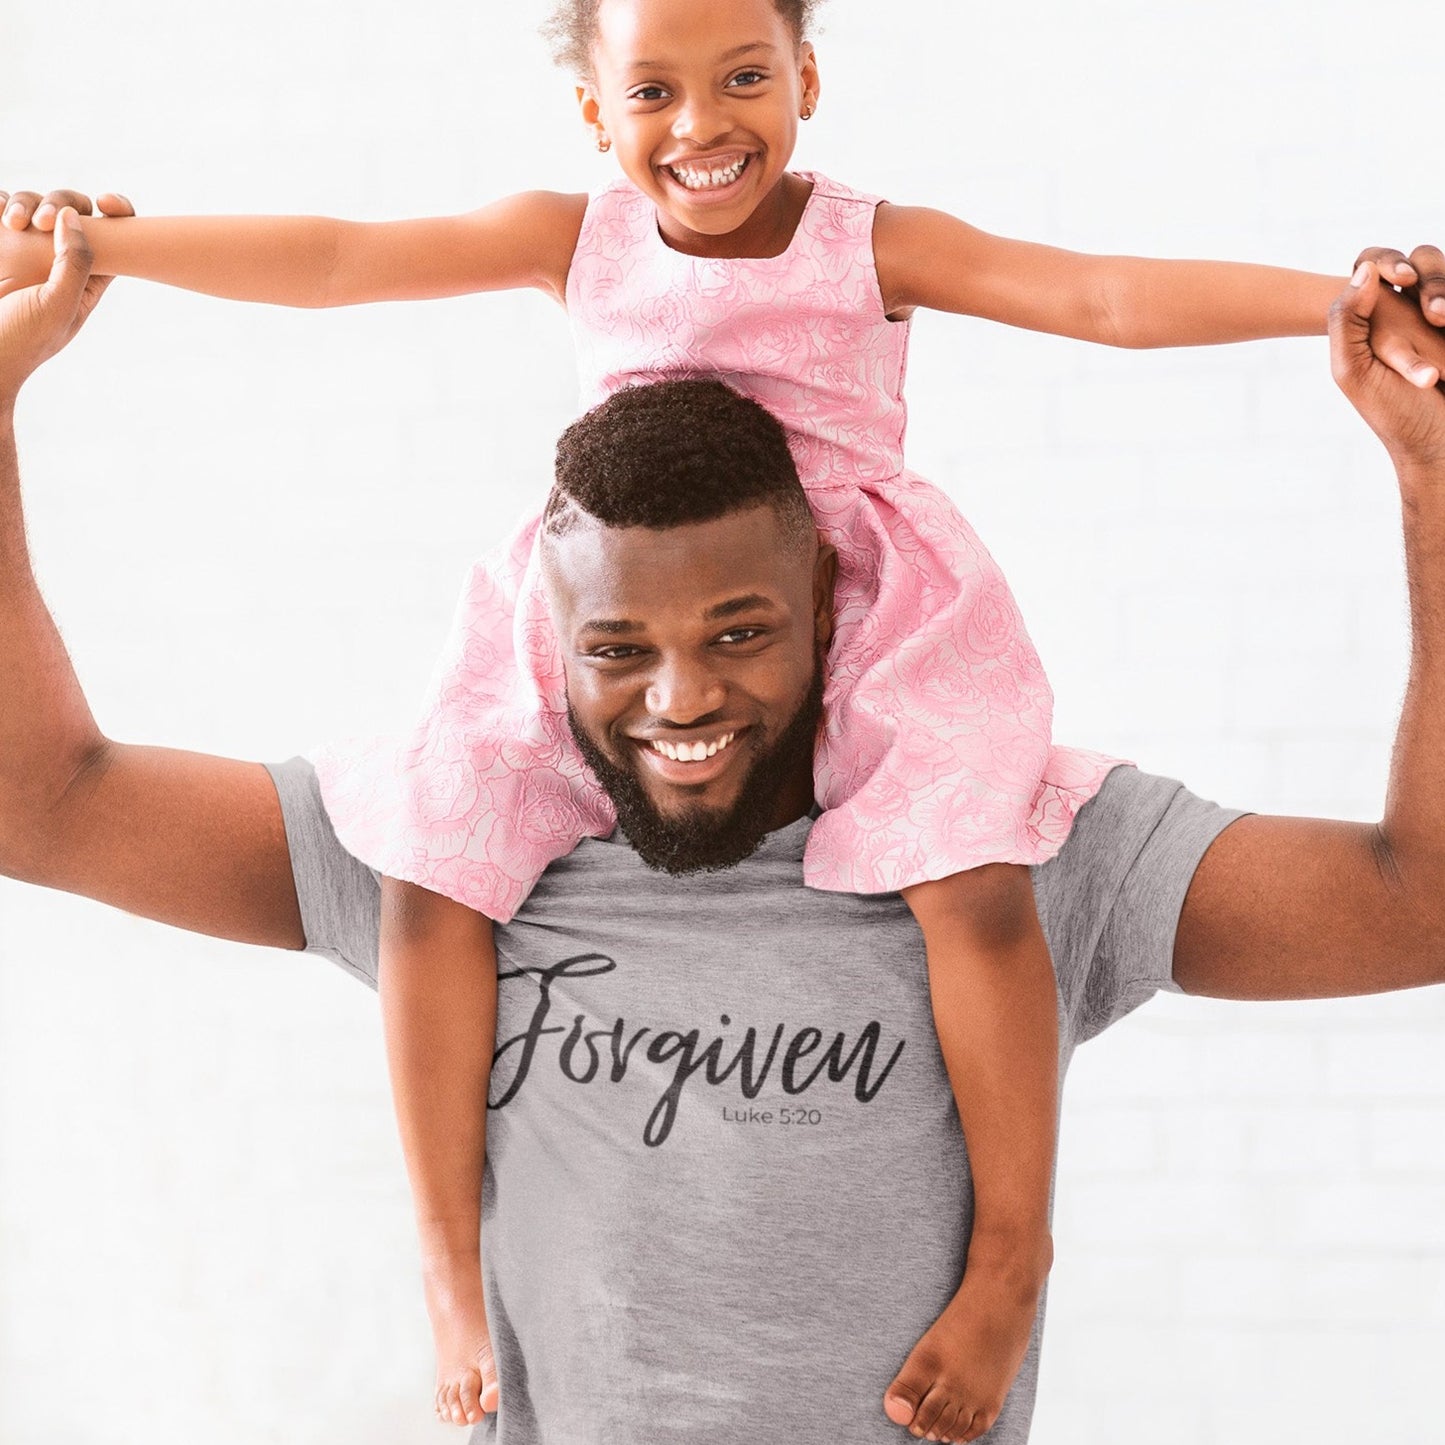 forgiven-luke-5-20-athletic-heather-grey-t-shirt-unisex-inspiring-christian-mockup-of-a-happy-dad-carrying-his-daughter-on-his-shoulders